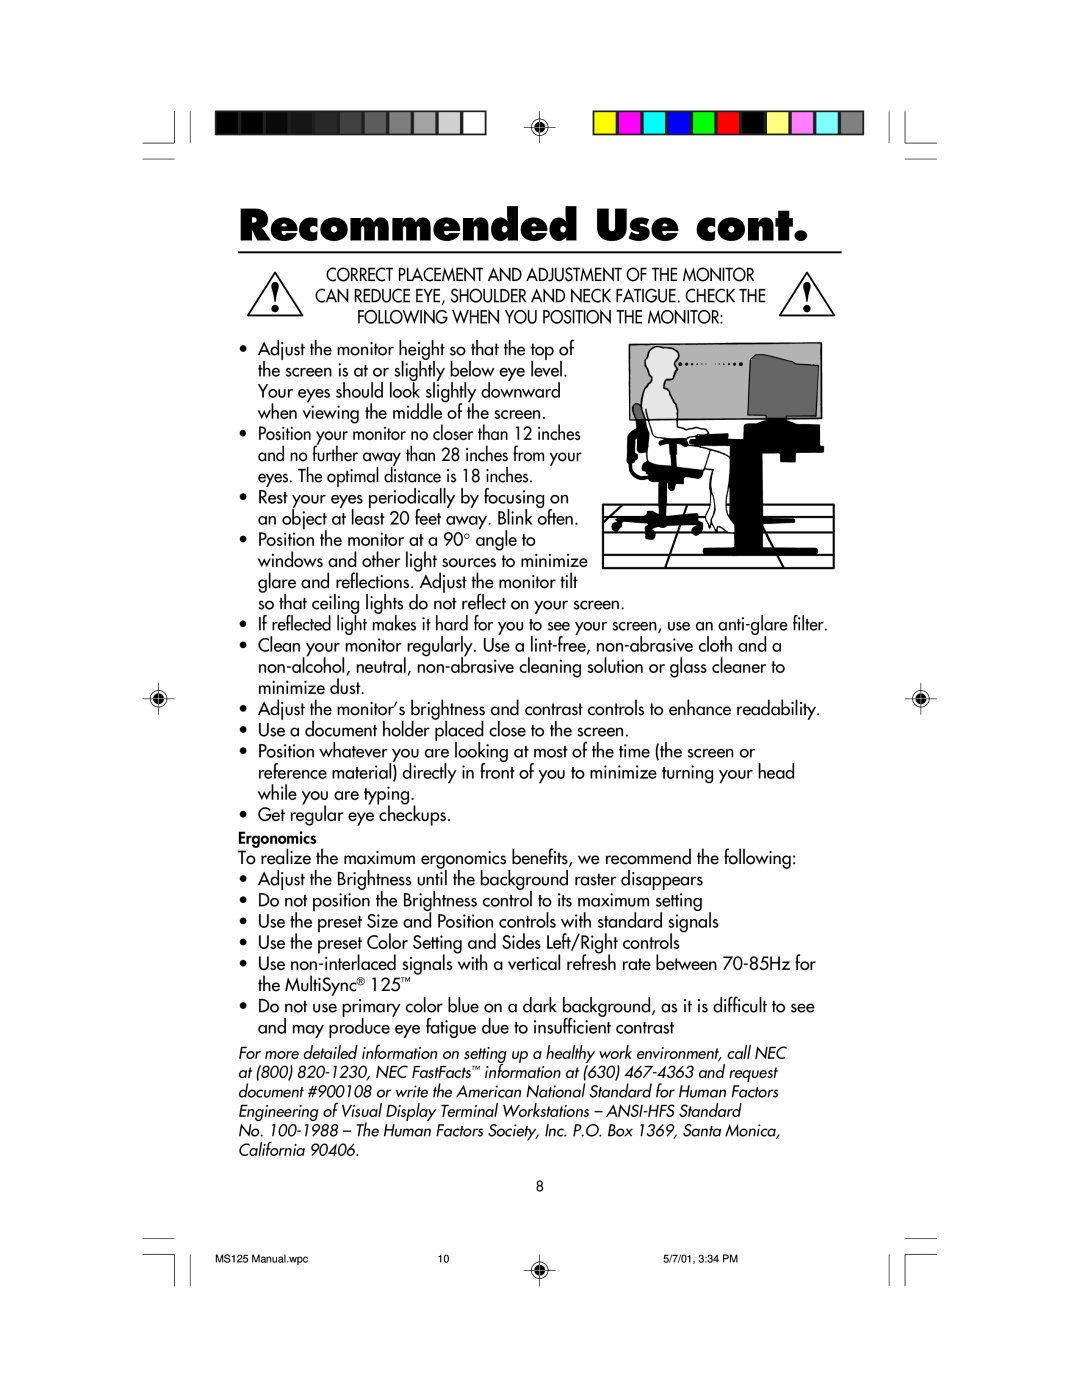 NEC MS125 manual Recommended Use cont 